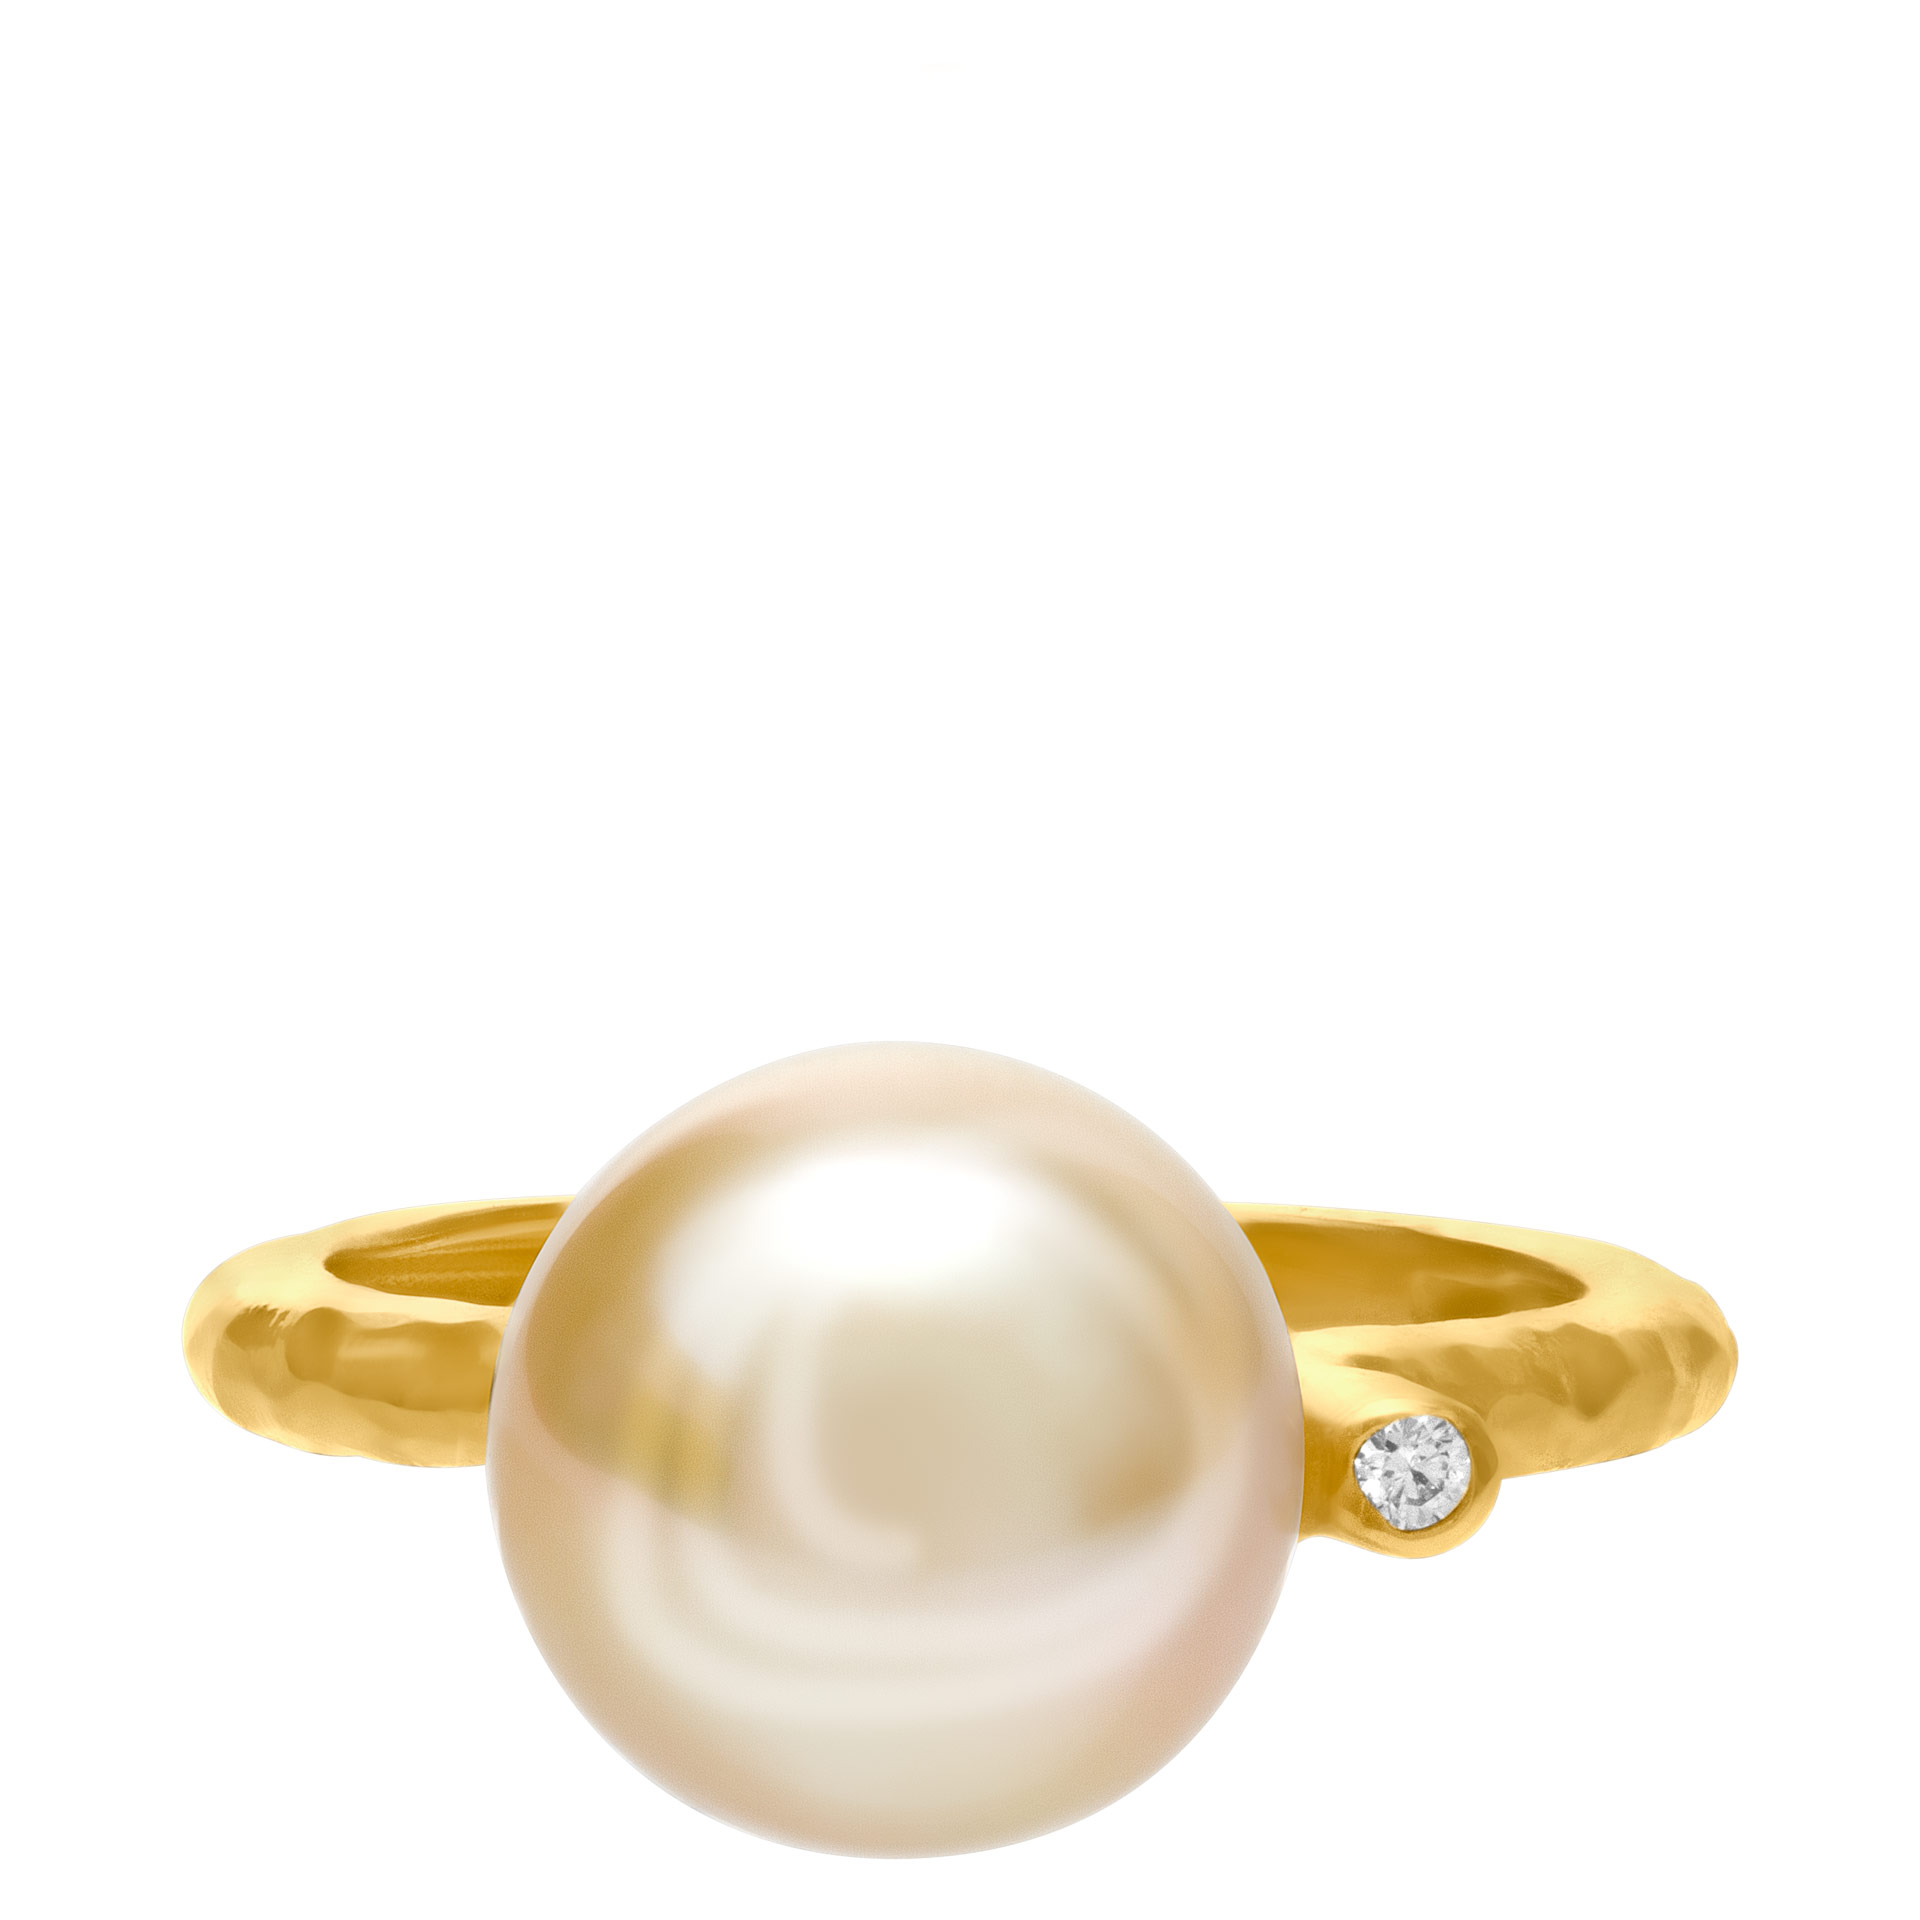 Golden South Sea Pearl (10.5 x11mm) ring, in 18k yellow gold with 0.02 carat diamond. image 1